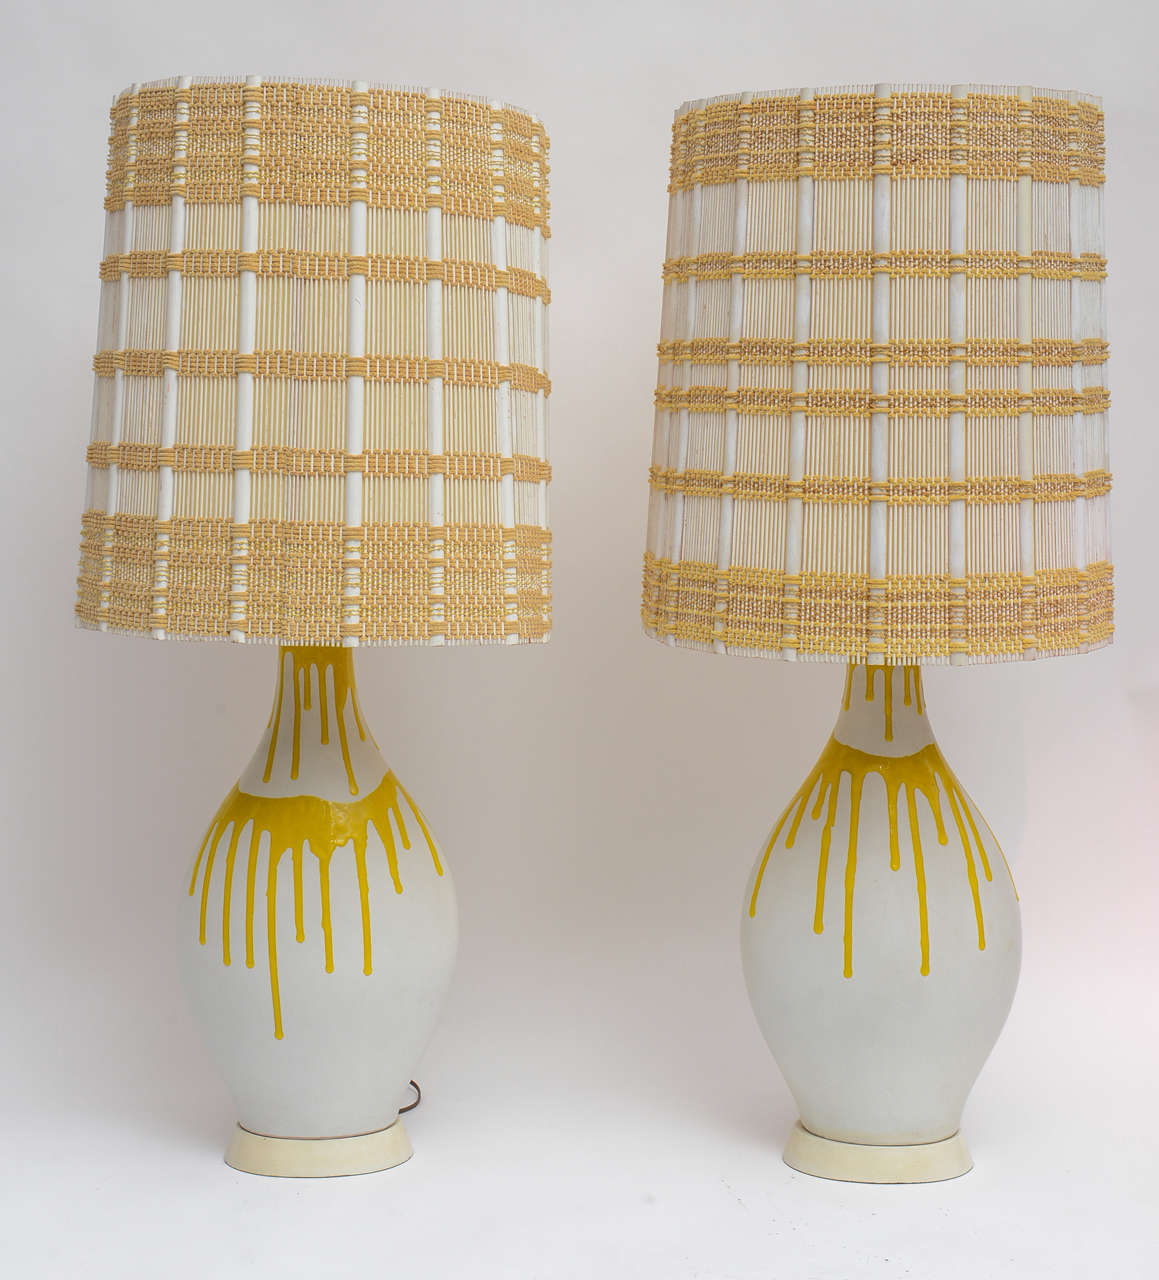 Chic pair of 1950s white ceramic lamps with dripping yellow glaze. (Shades not included)